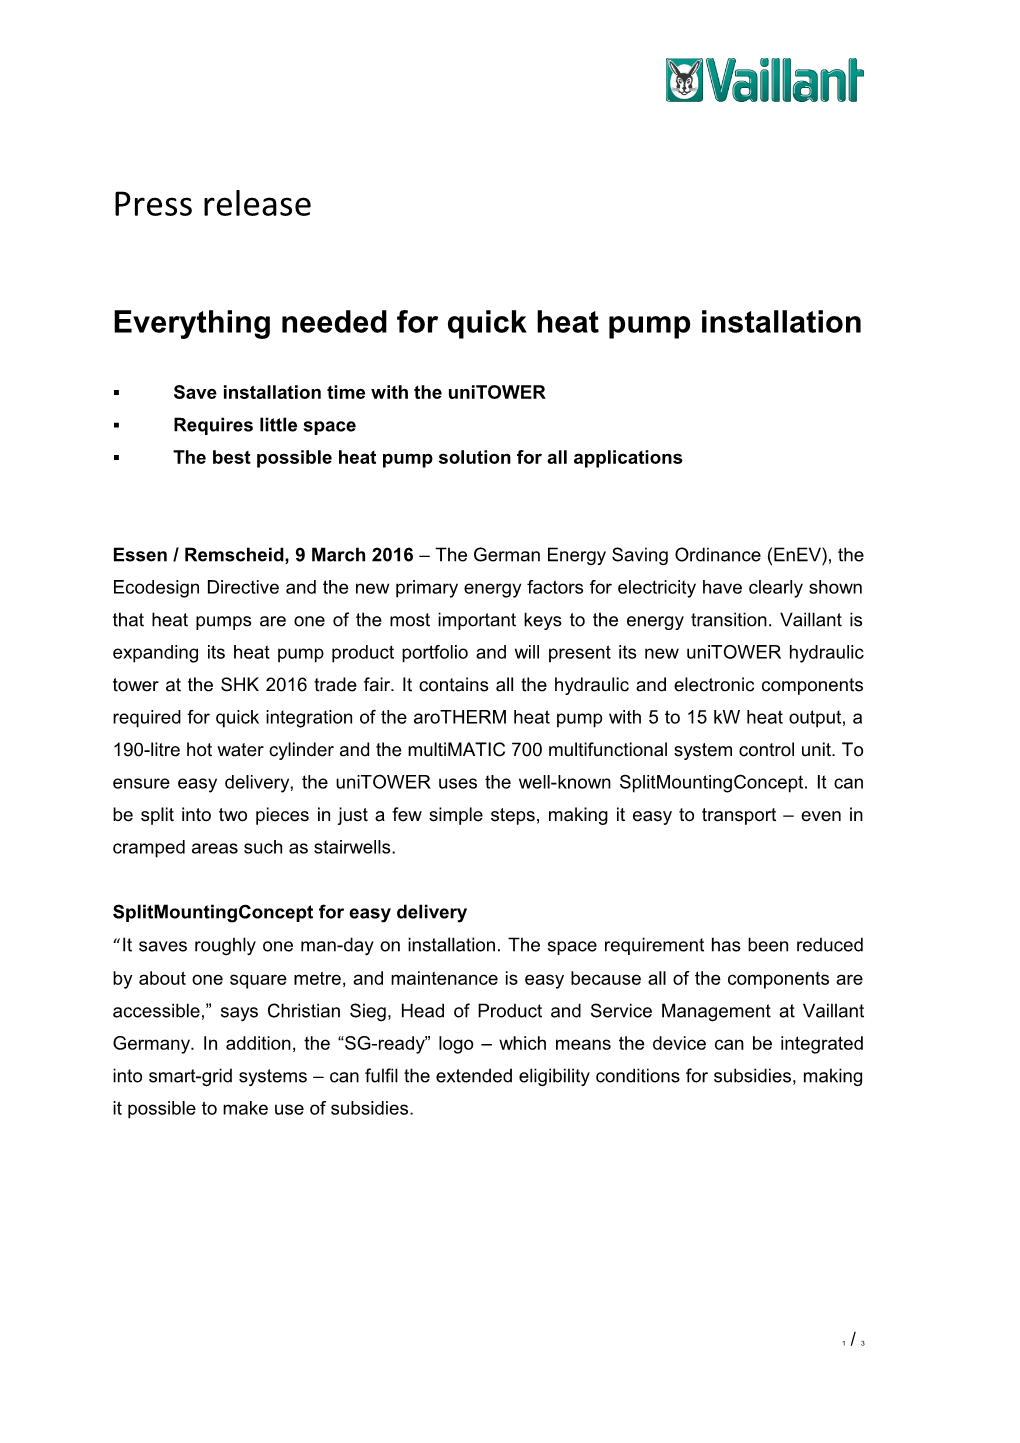 Everything Needed for Quick Heat Pump Installation